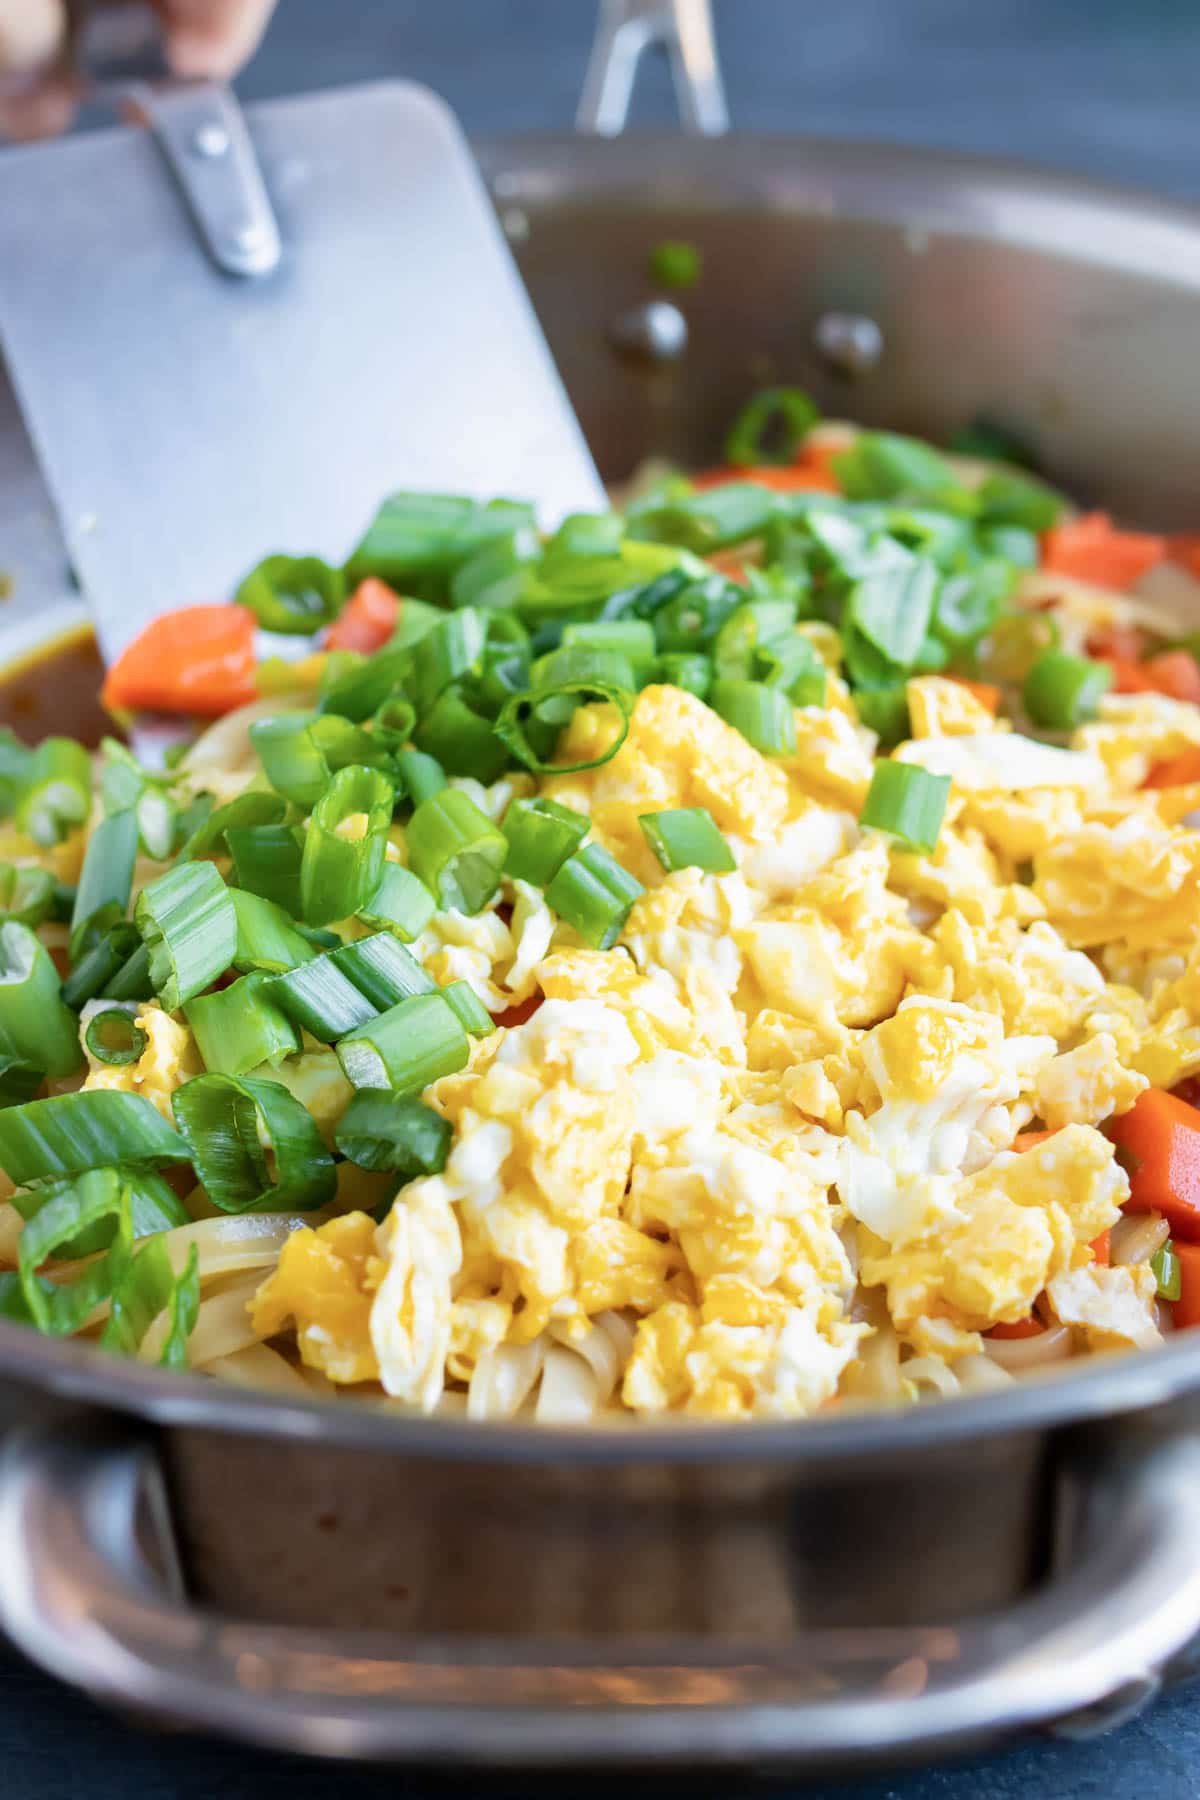 Combining eggs, green onions, and vegetables in a skillet for homemade pad Thai.